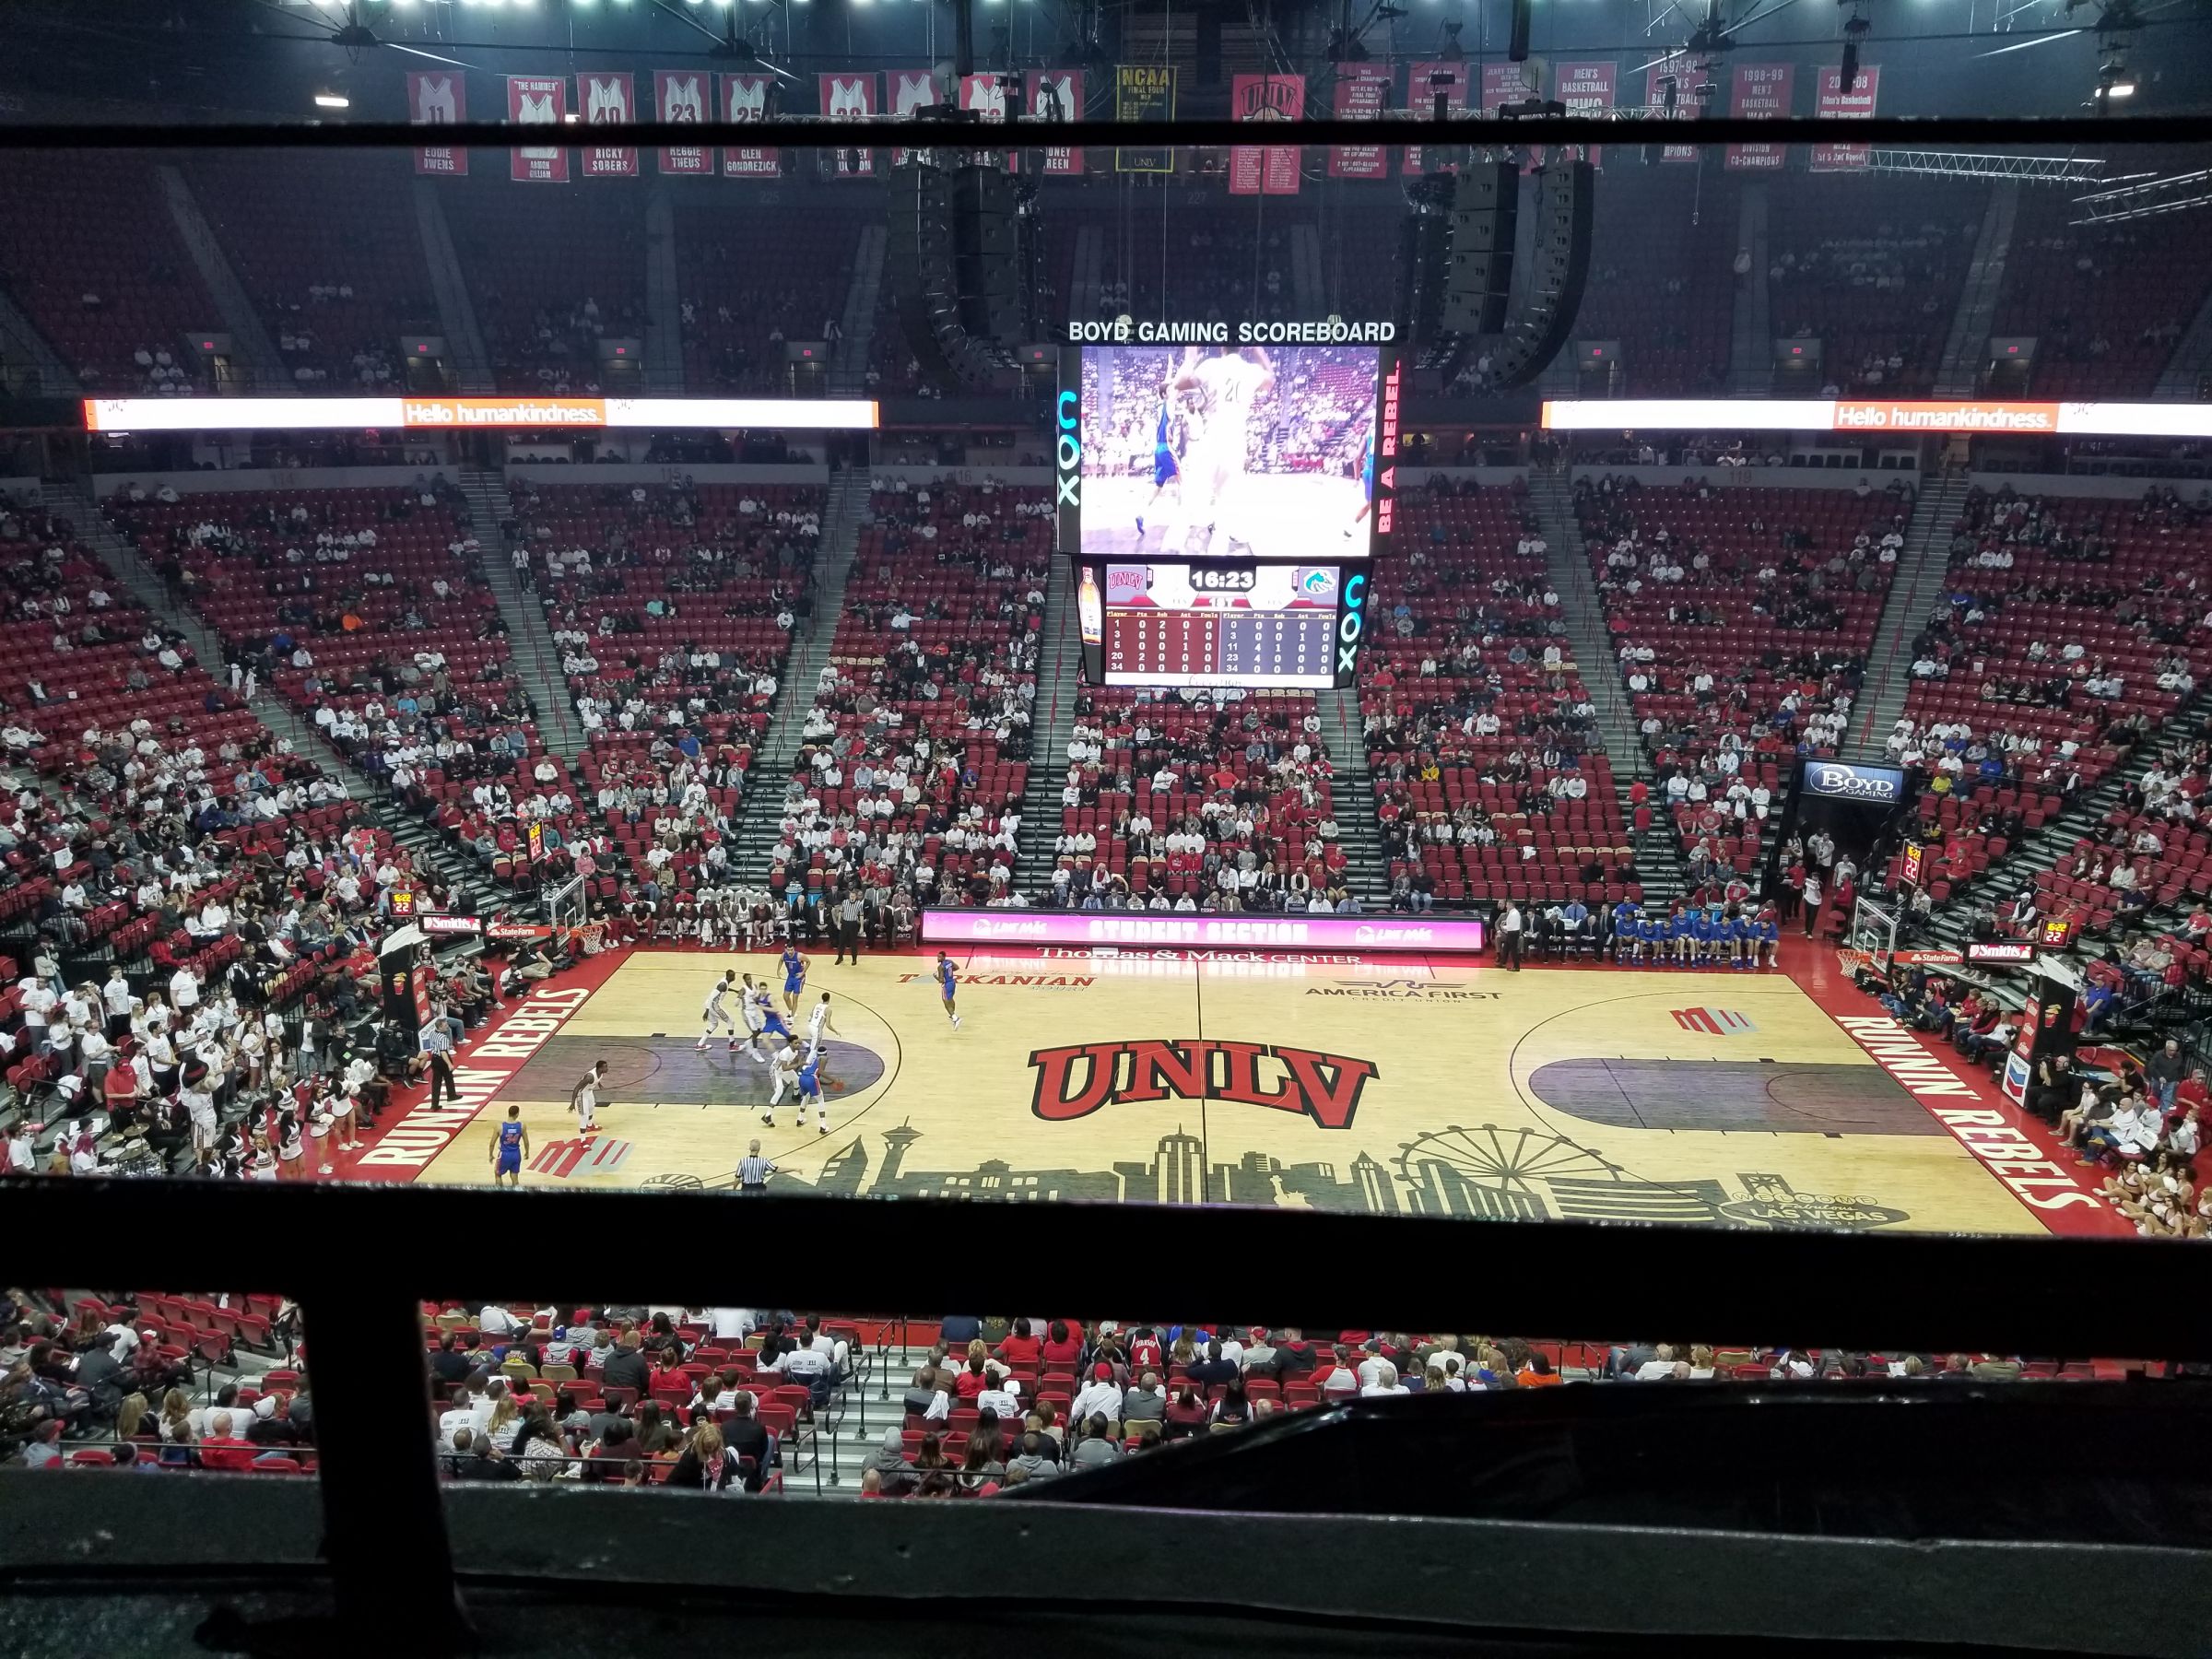 Thomas and Mack Center Section 209 - RateYourSeats.com